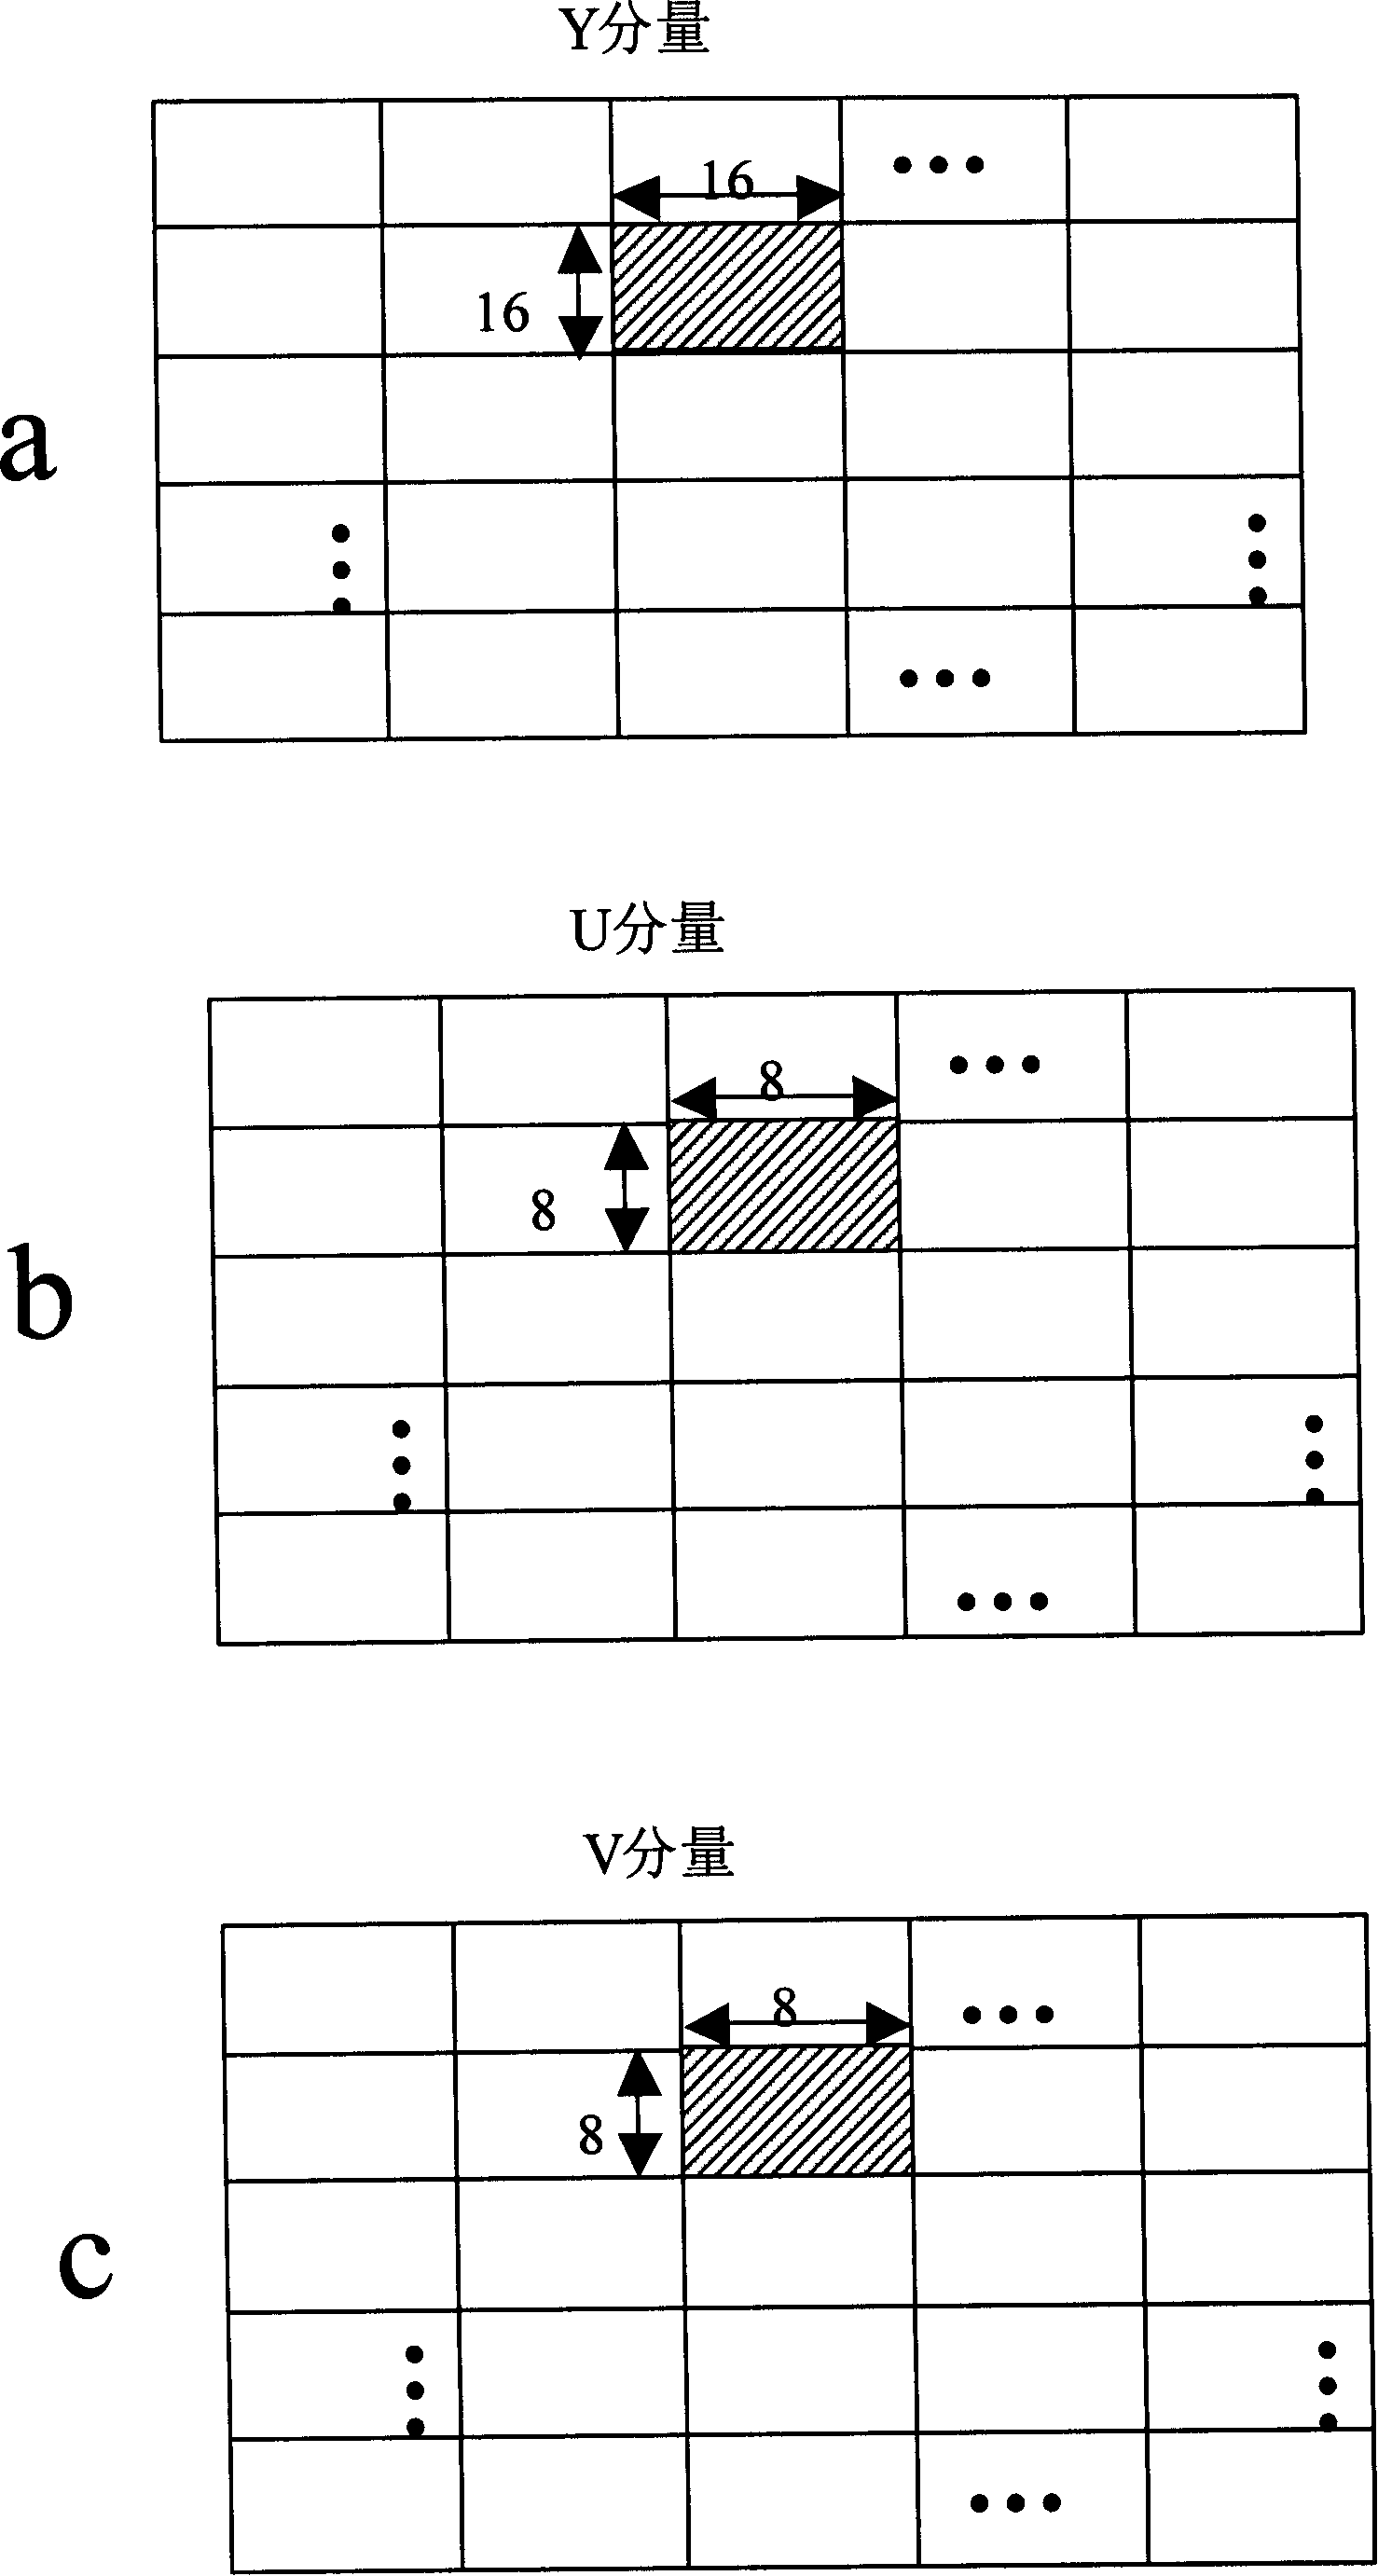 Method for mapping image address in memory